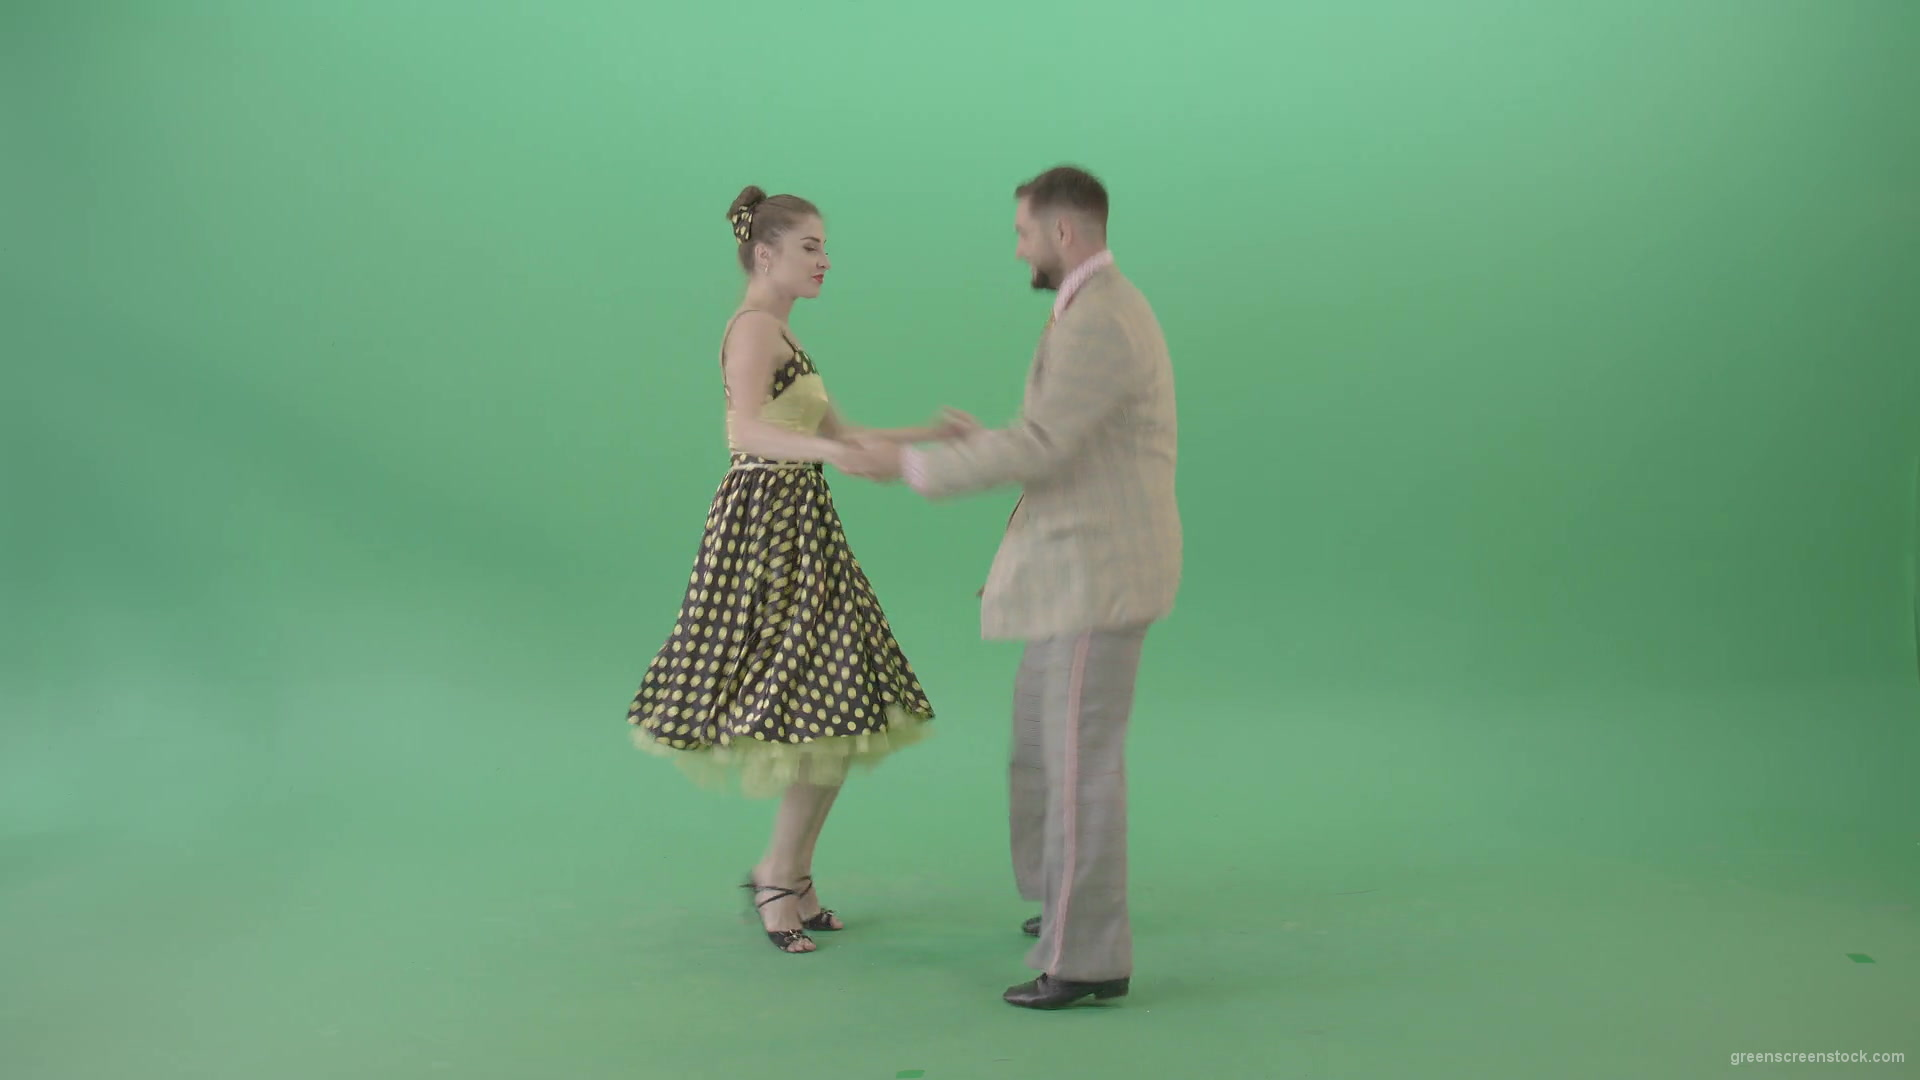 Amazing-couple-dance-Lindy-Hop-and-Rock-and-Roll-isolated-on-Green-Screen-4K-Video-Footage-1920_008 Green Screen Stock